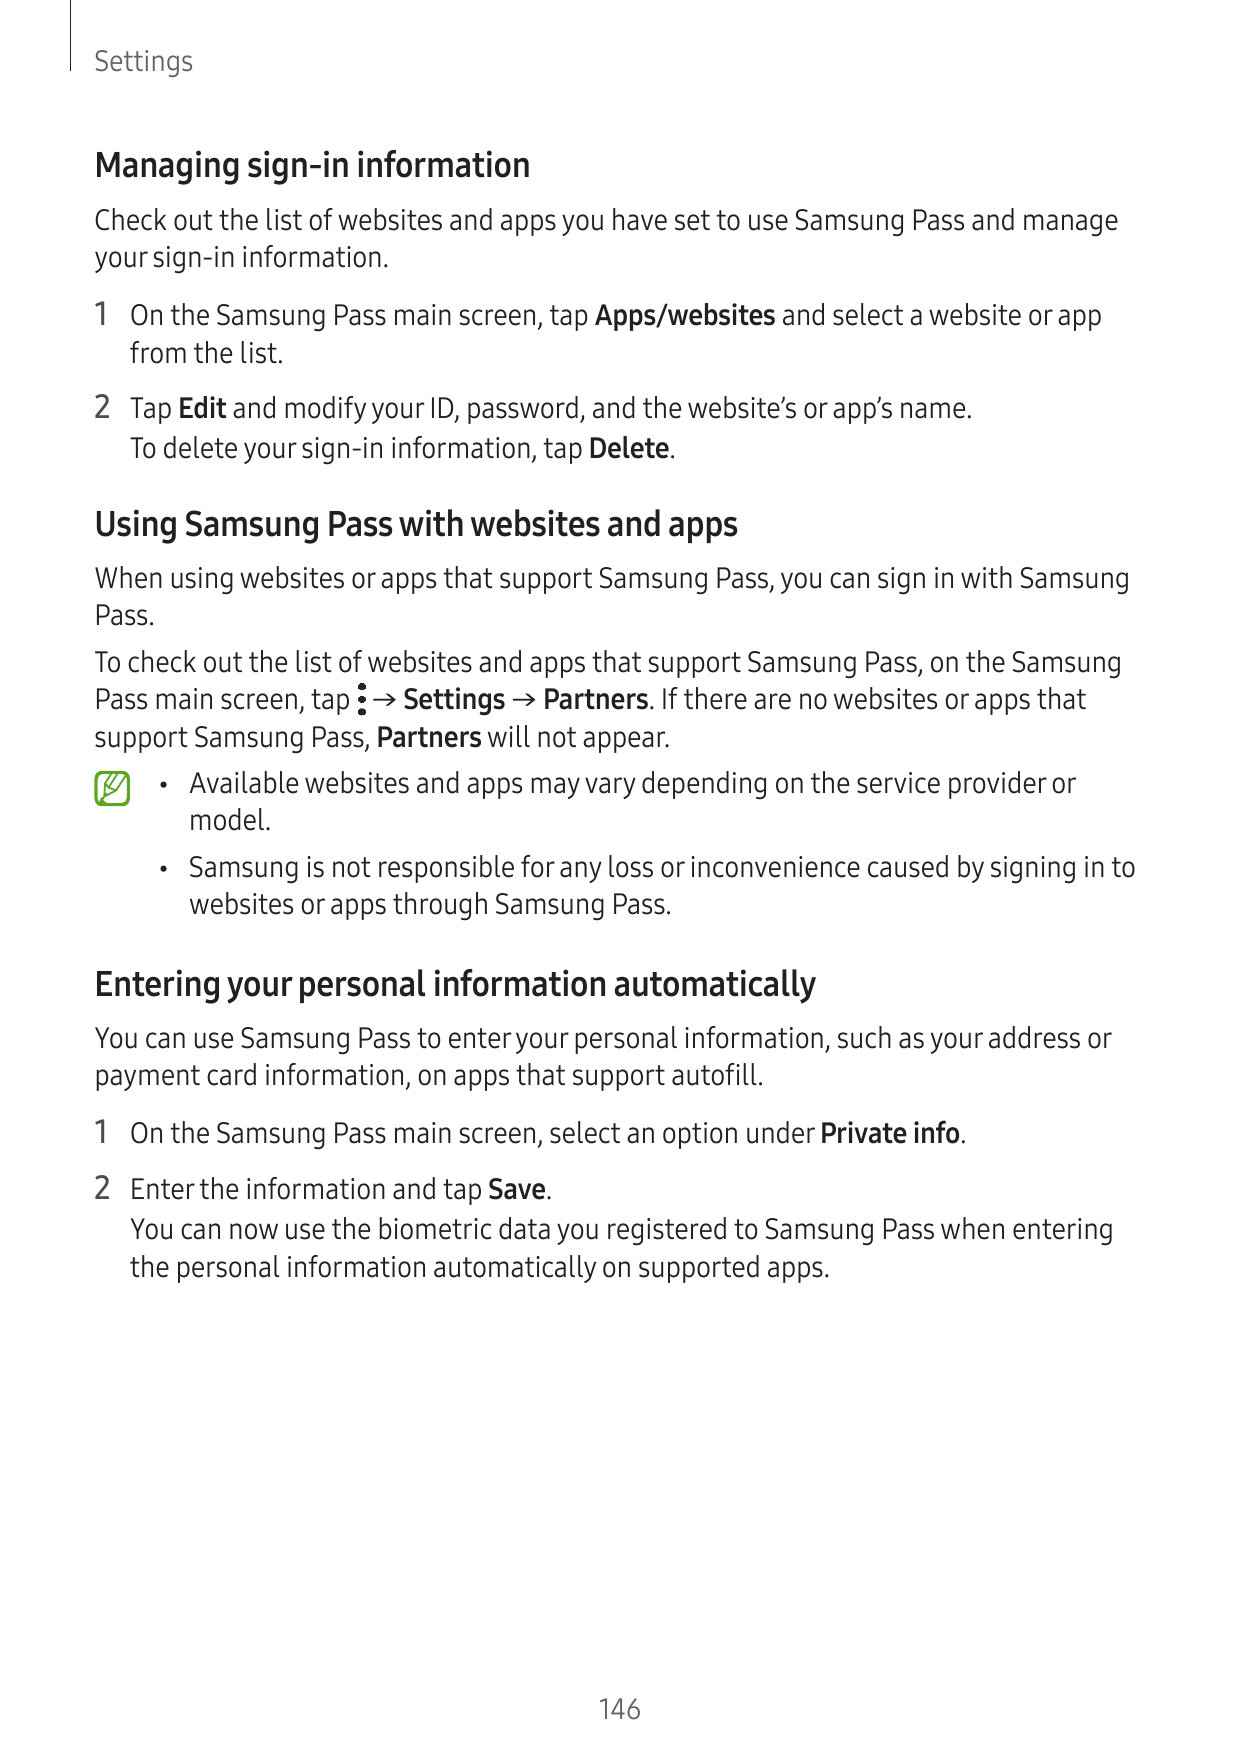 SettingsManaging sign-in informationCheck out the list of websites and apps you have set to use Samsung Pass and manageyour sign